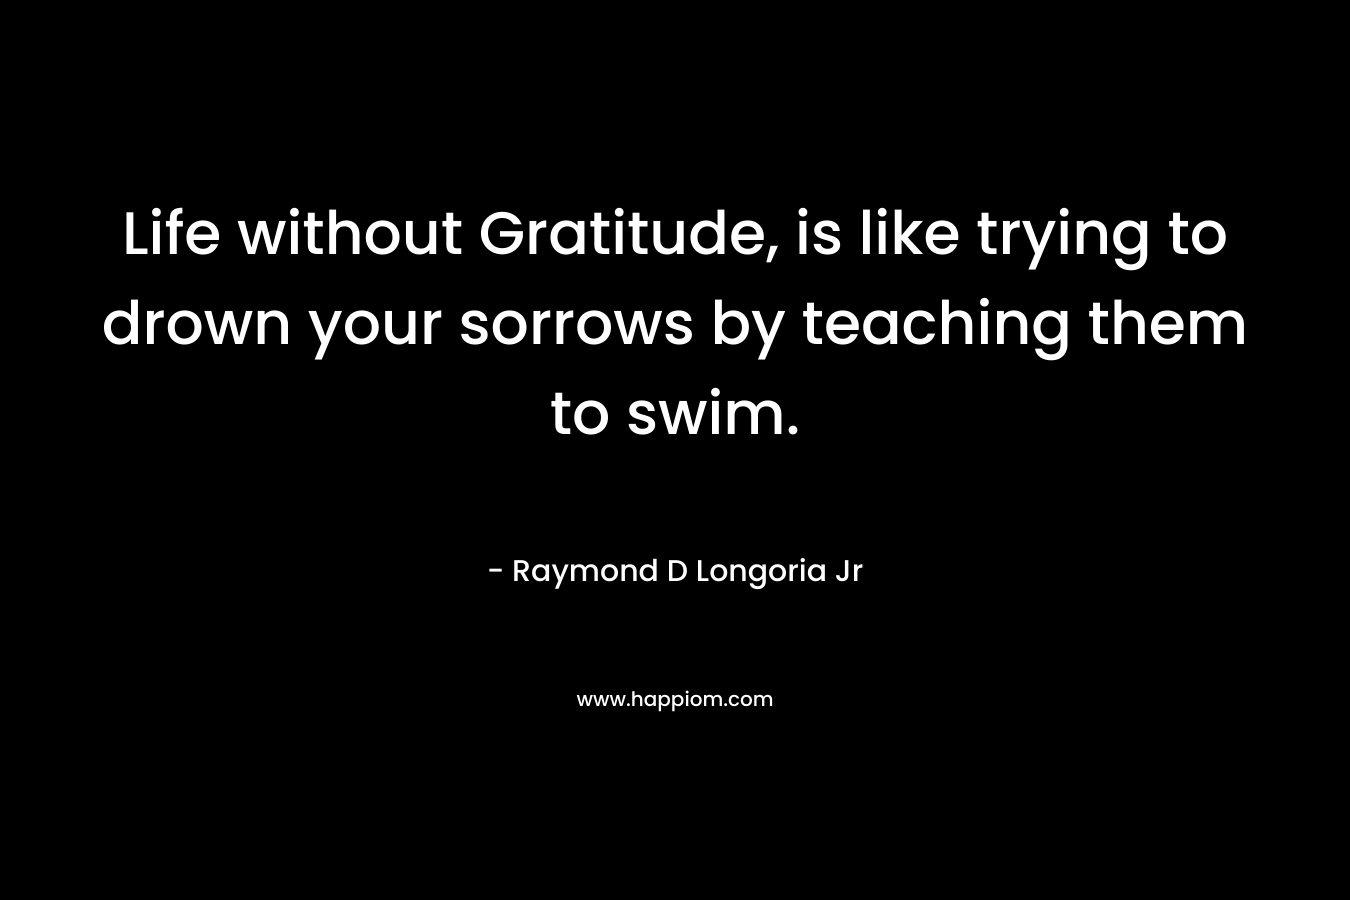 Life without Gratitude, is like trying to drown your sorrows by teaching them to swim.